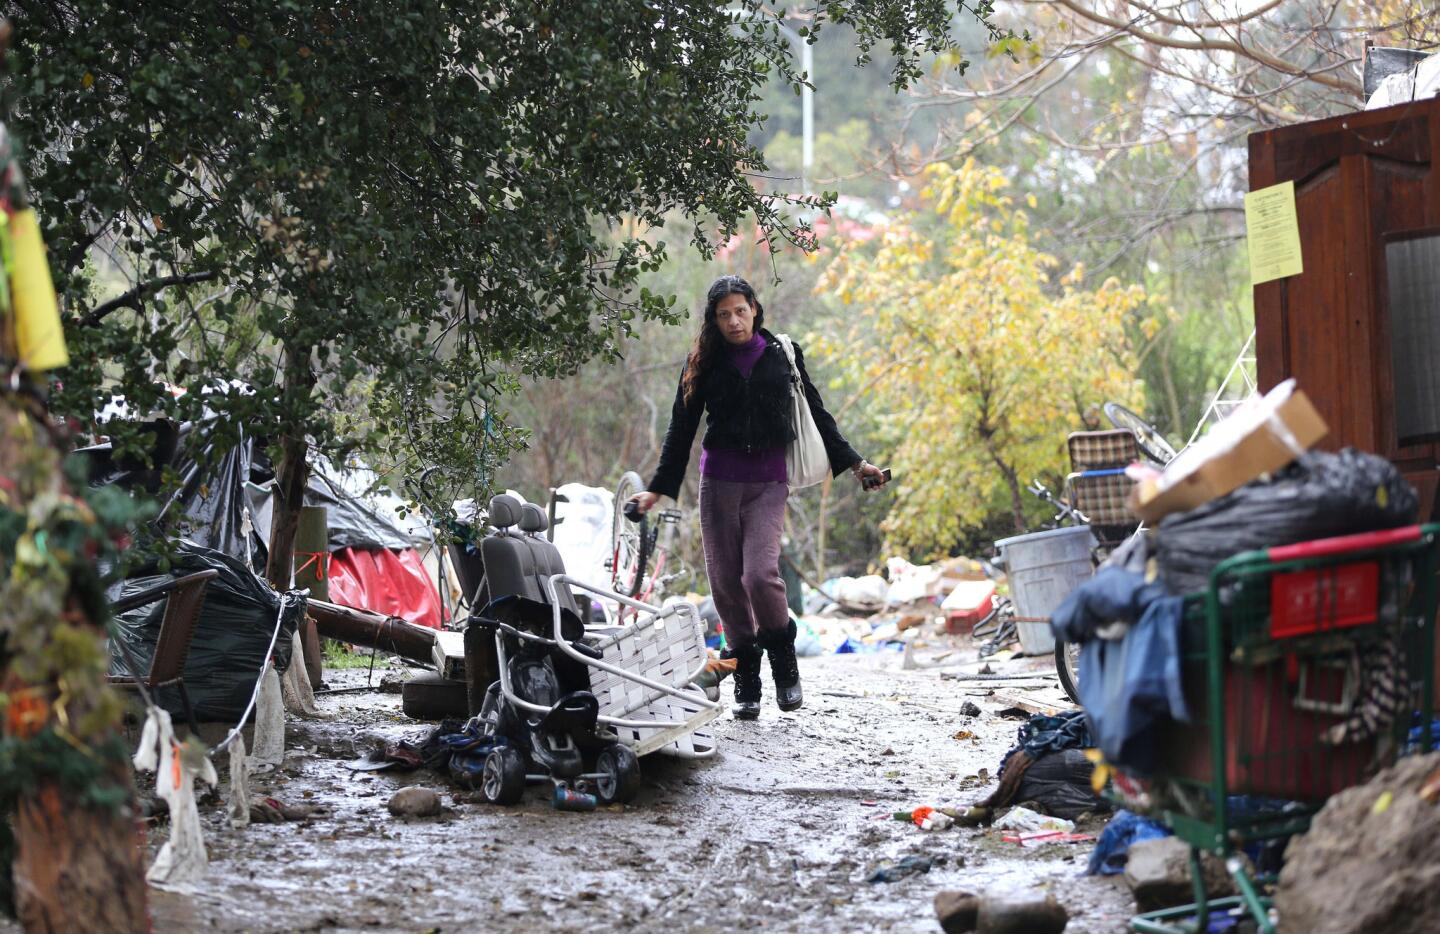 A person walks along a muddy path at the Silicon Valley homeless encampment known as "The Jungle" on December 3, 2014 in San Jose, California.